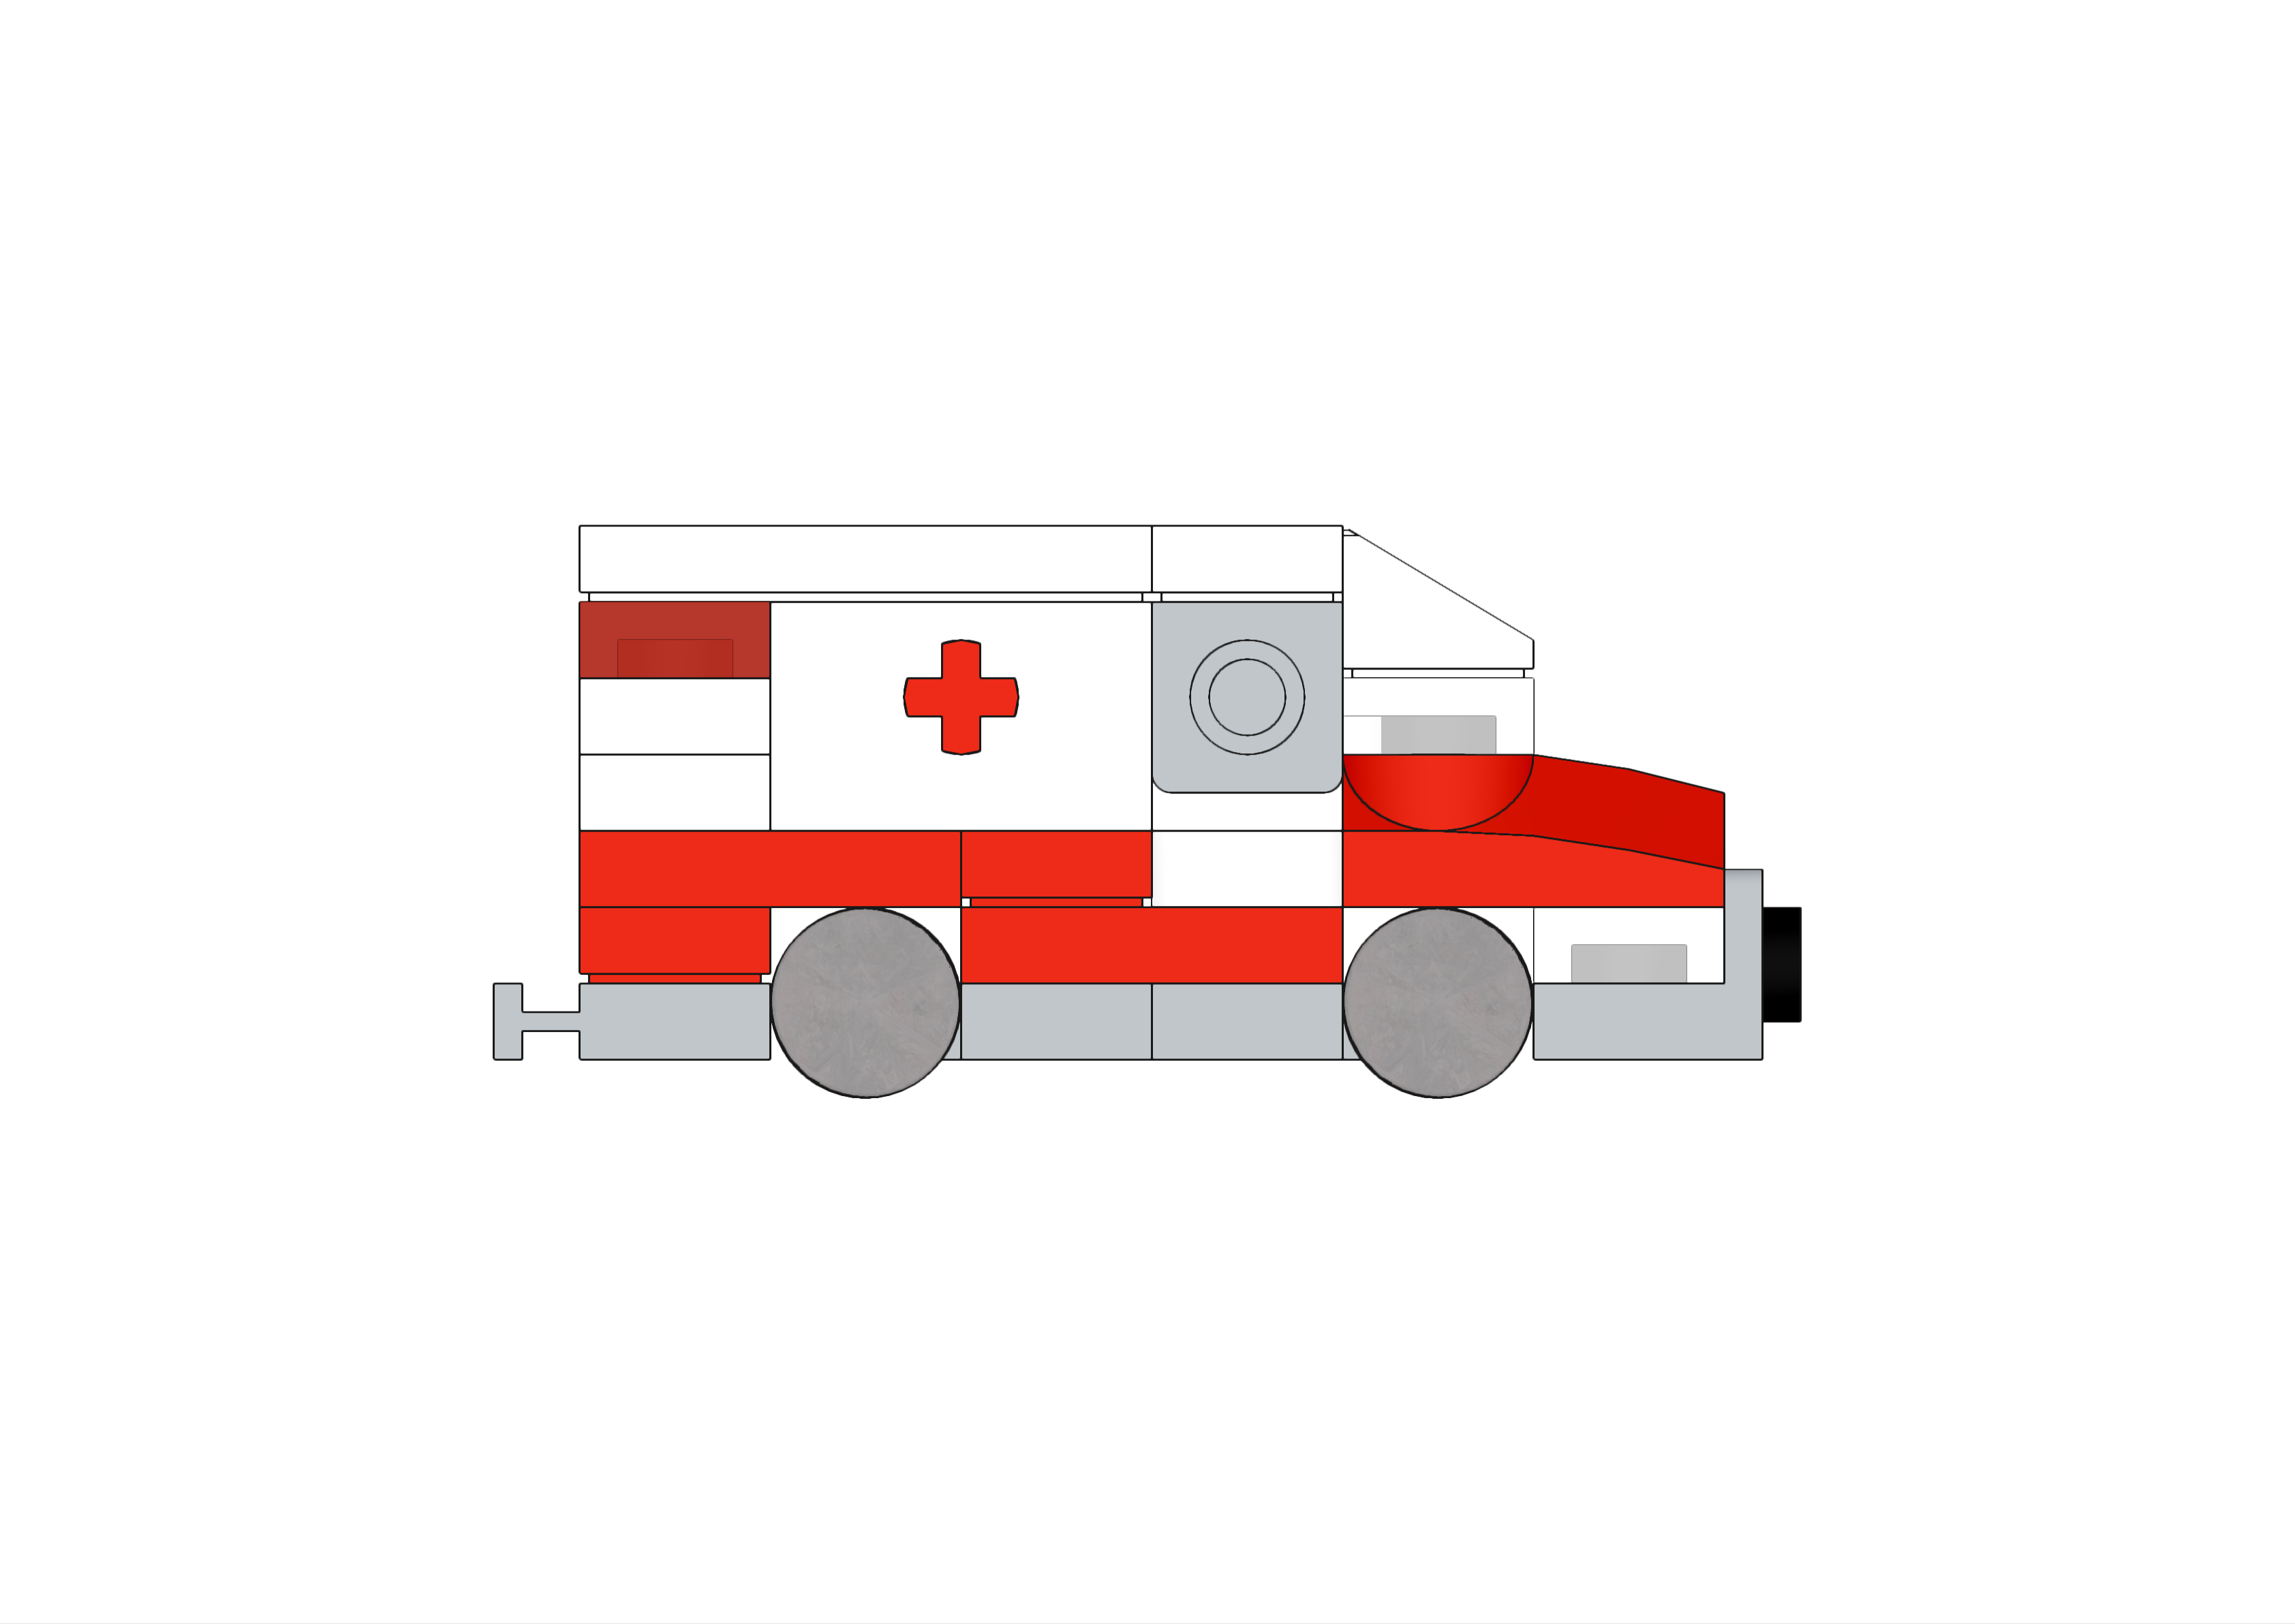 Alternate side view image of the LEGO Micro Ambulance MOC.